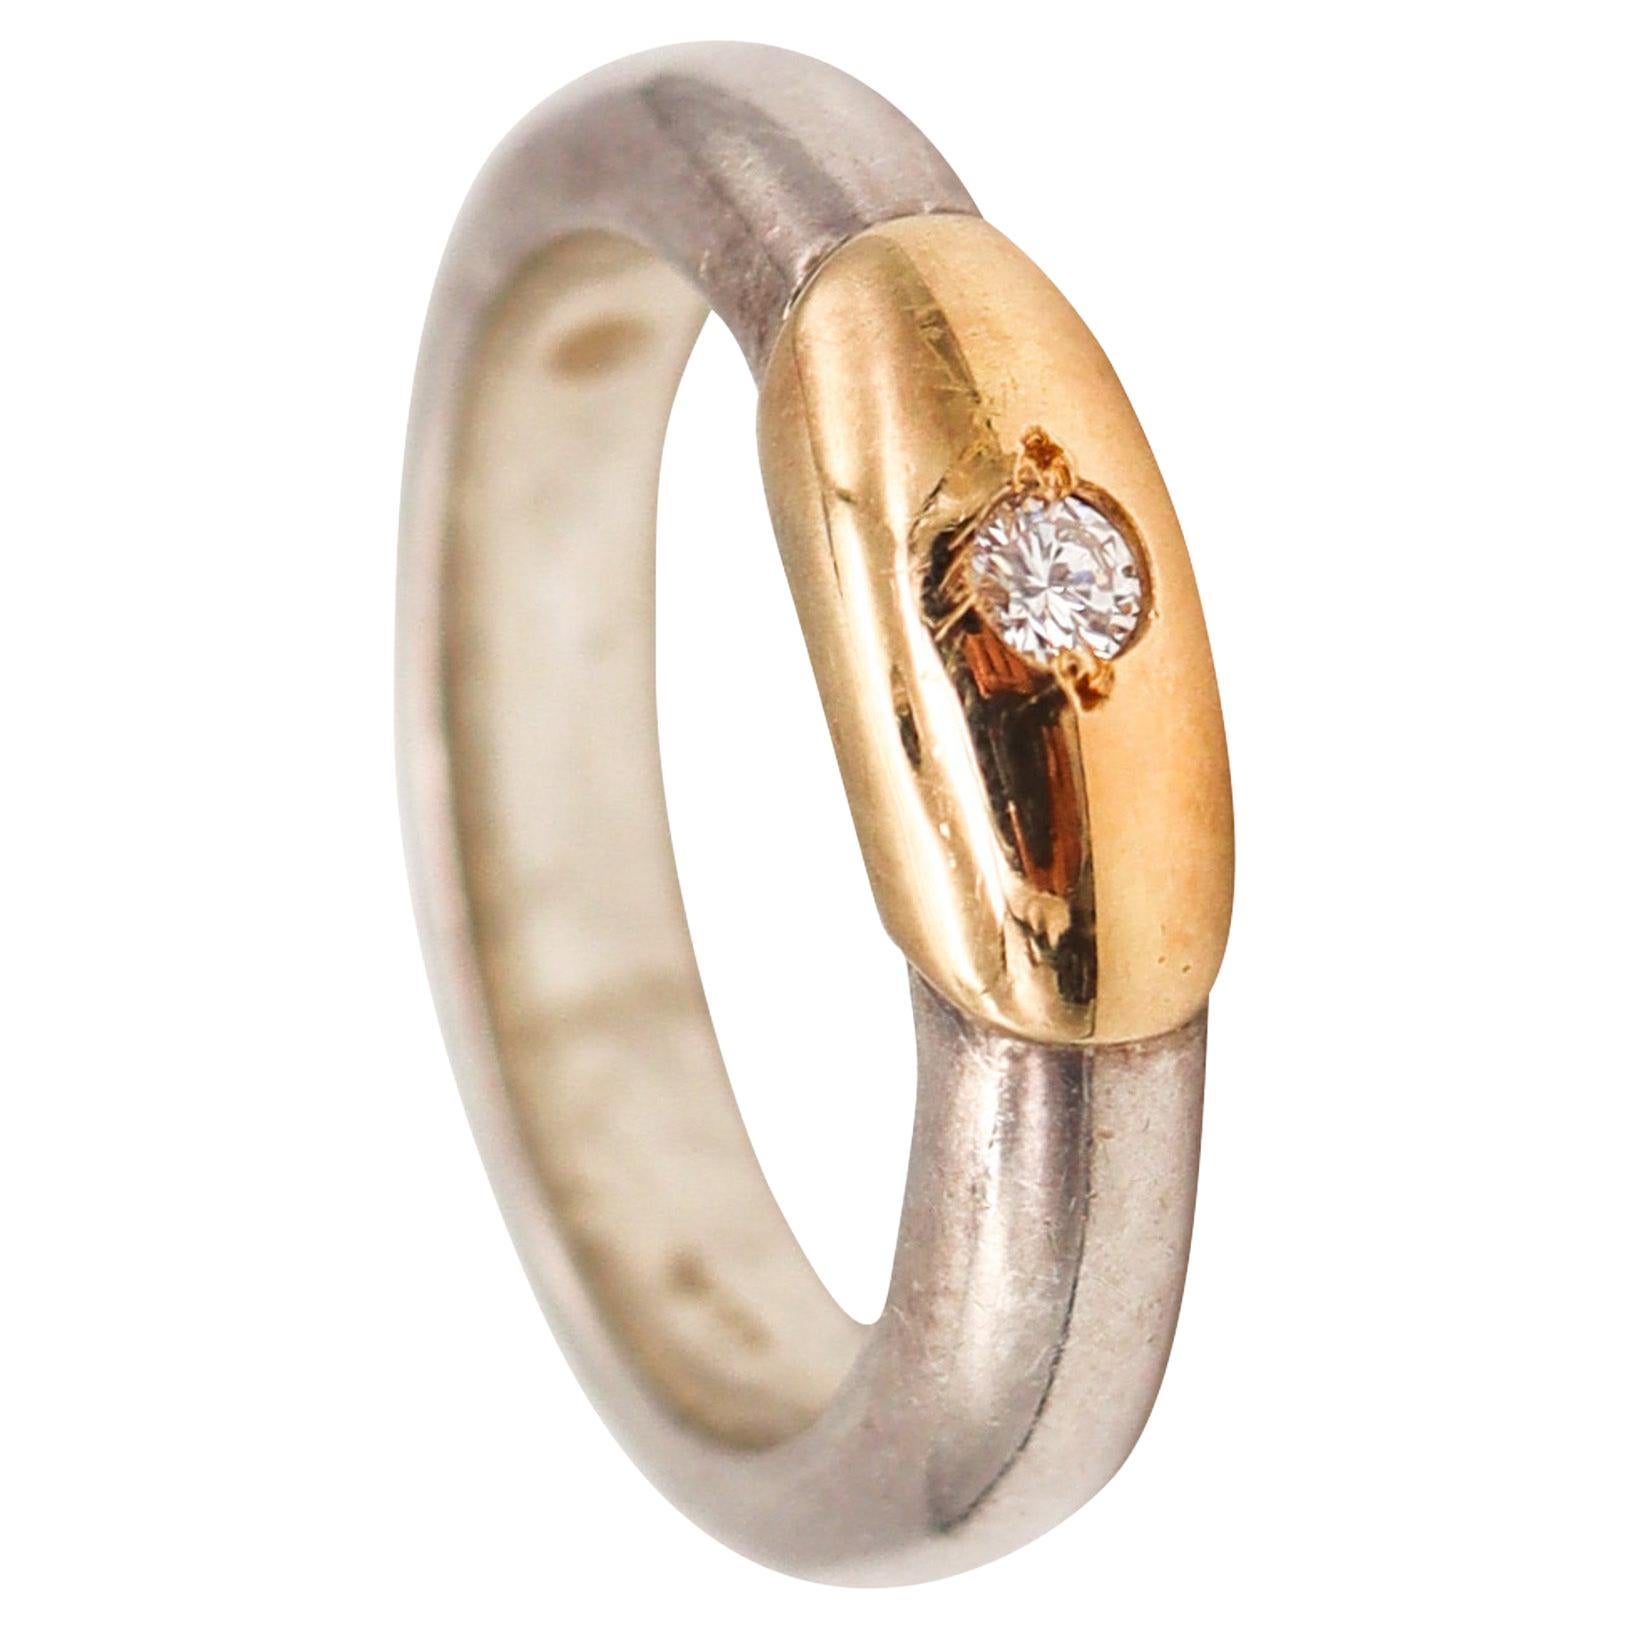 Lalaounis 1970 Greece Band Ring in 18kt Yellow Gold & Sterling with Diamond